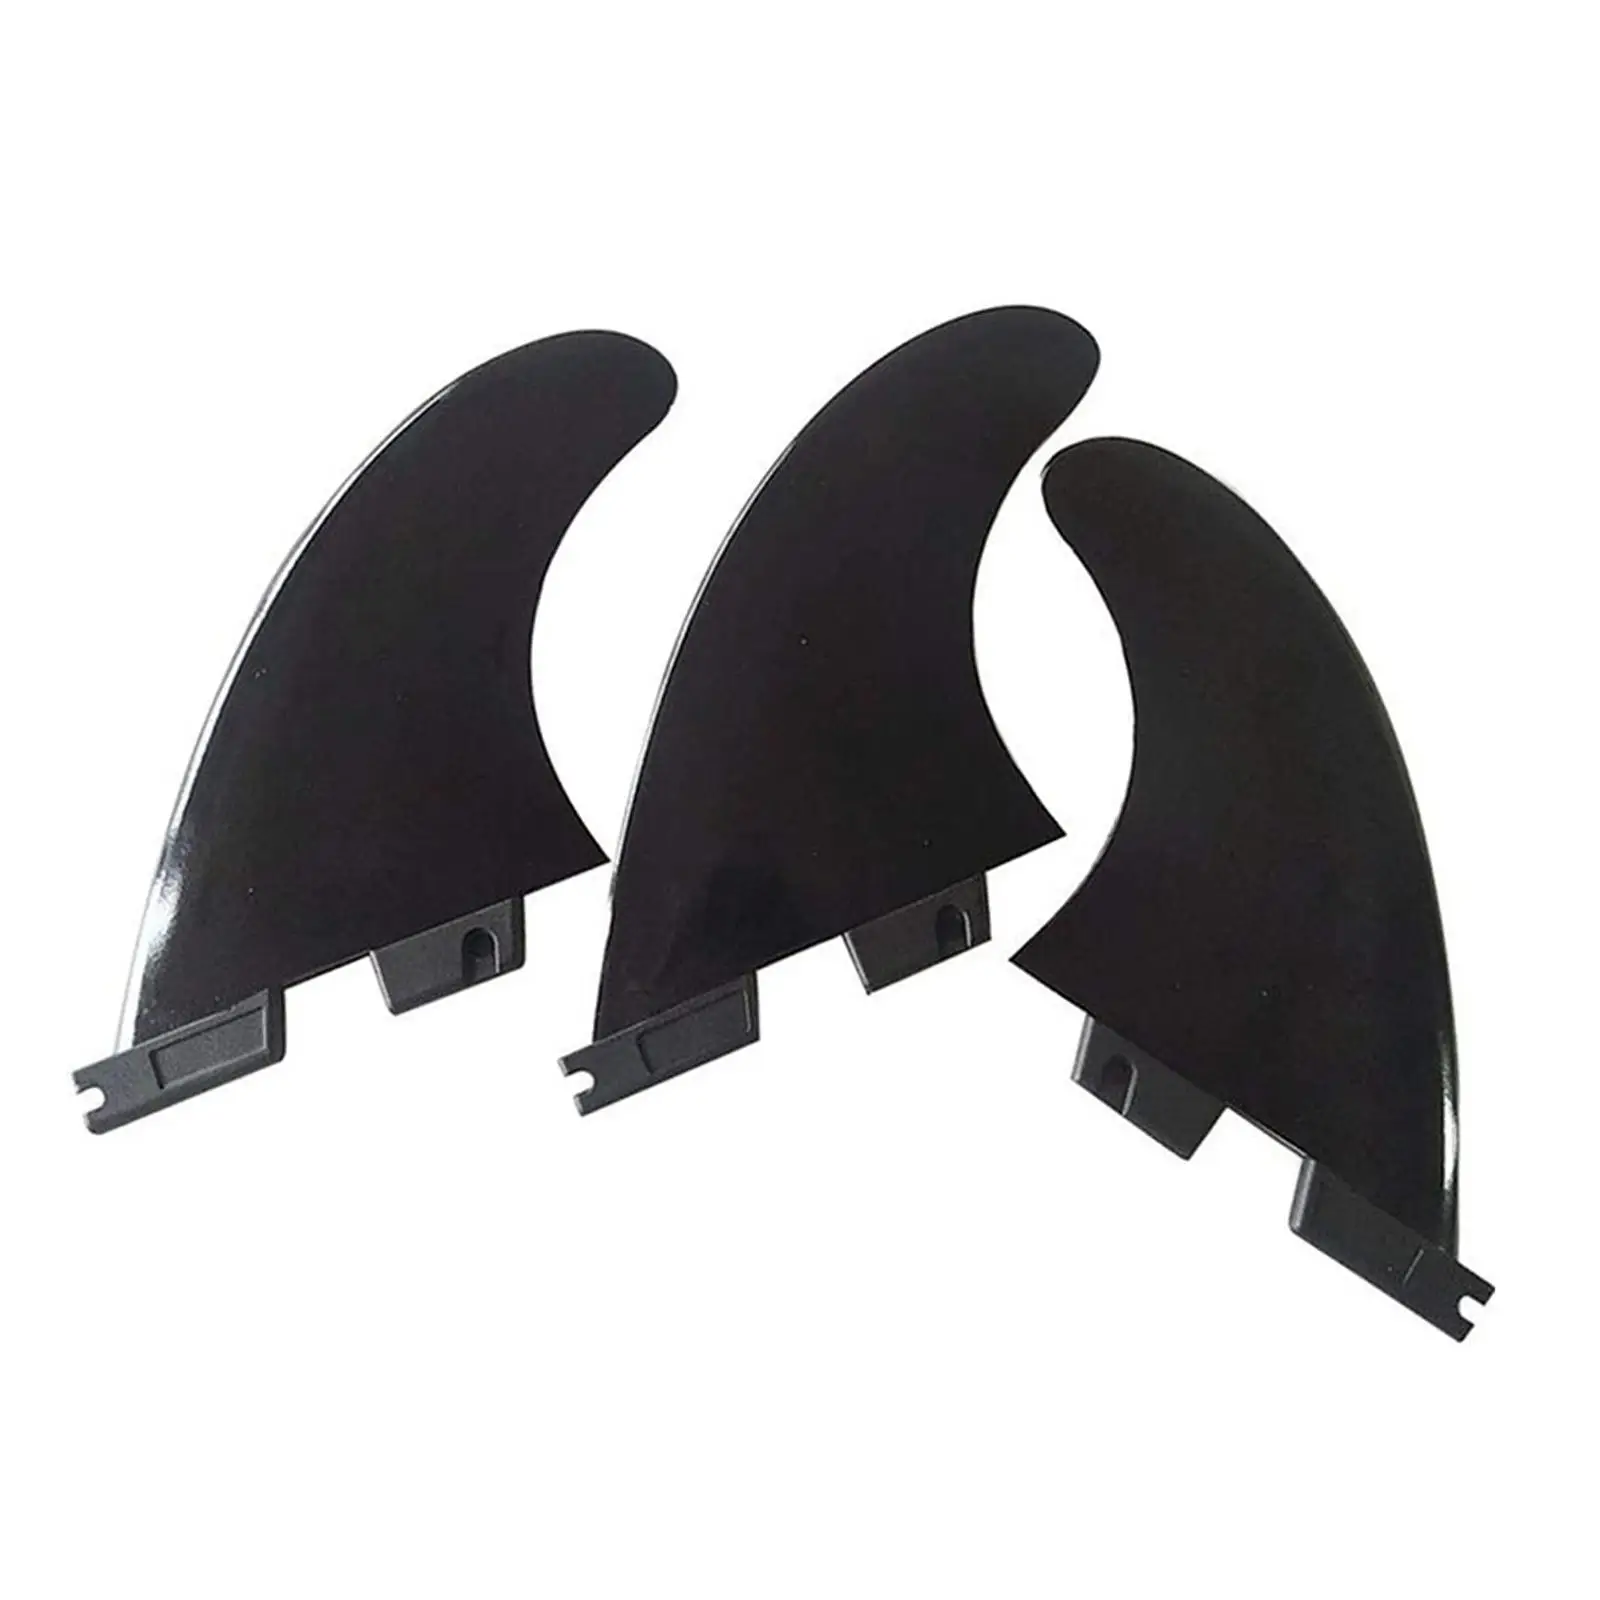 3x Surfboard Fin Durable Detachable Surfboard Tail Rudder Surfing Fin for Longboard Surfing Boards Paddleboard Dinghy Parts